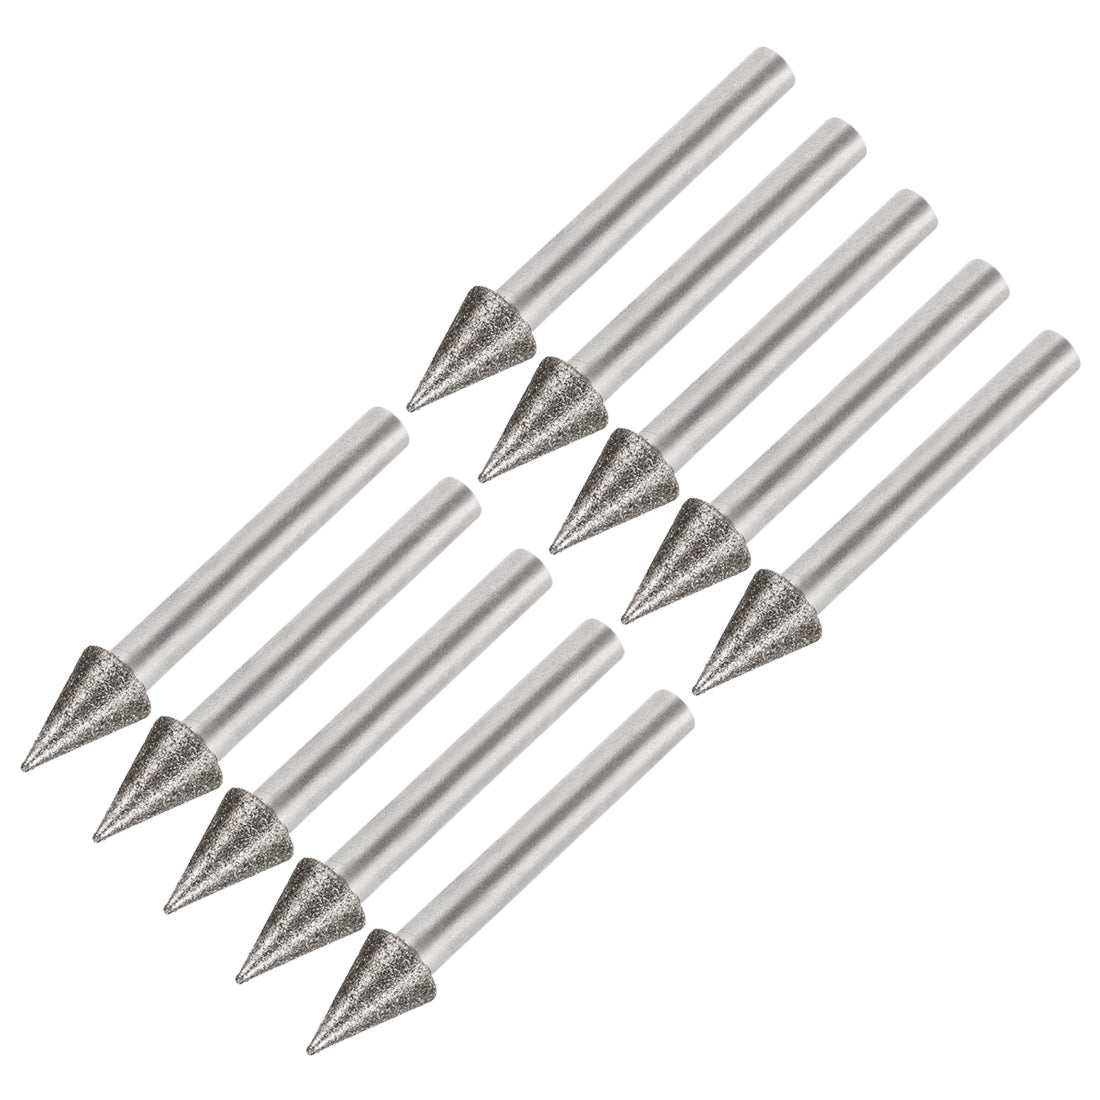 uxcell Uxcell Diamond Burrs Grinding Drill Bits for Carving Rotary Tool 1/4-Inch Shank 10mm Conial 120 Grit 10 Pcs